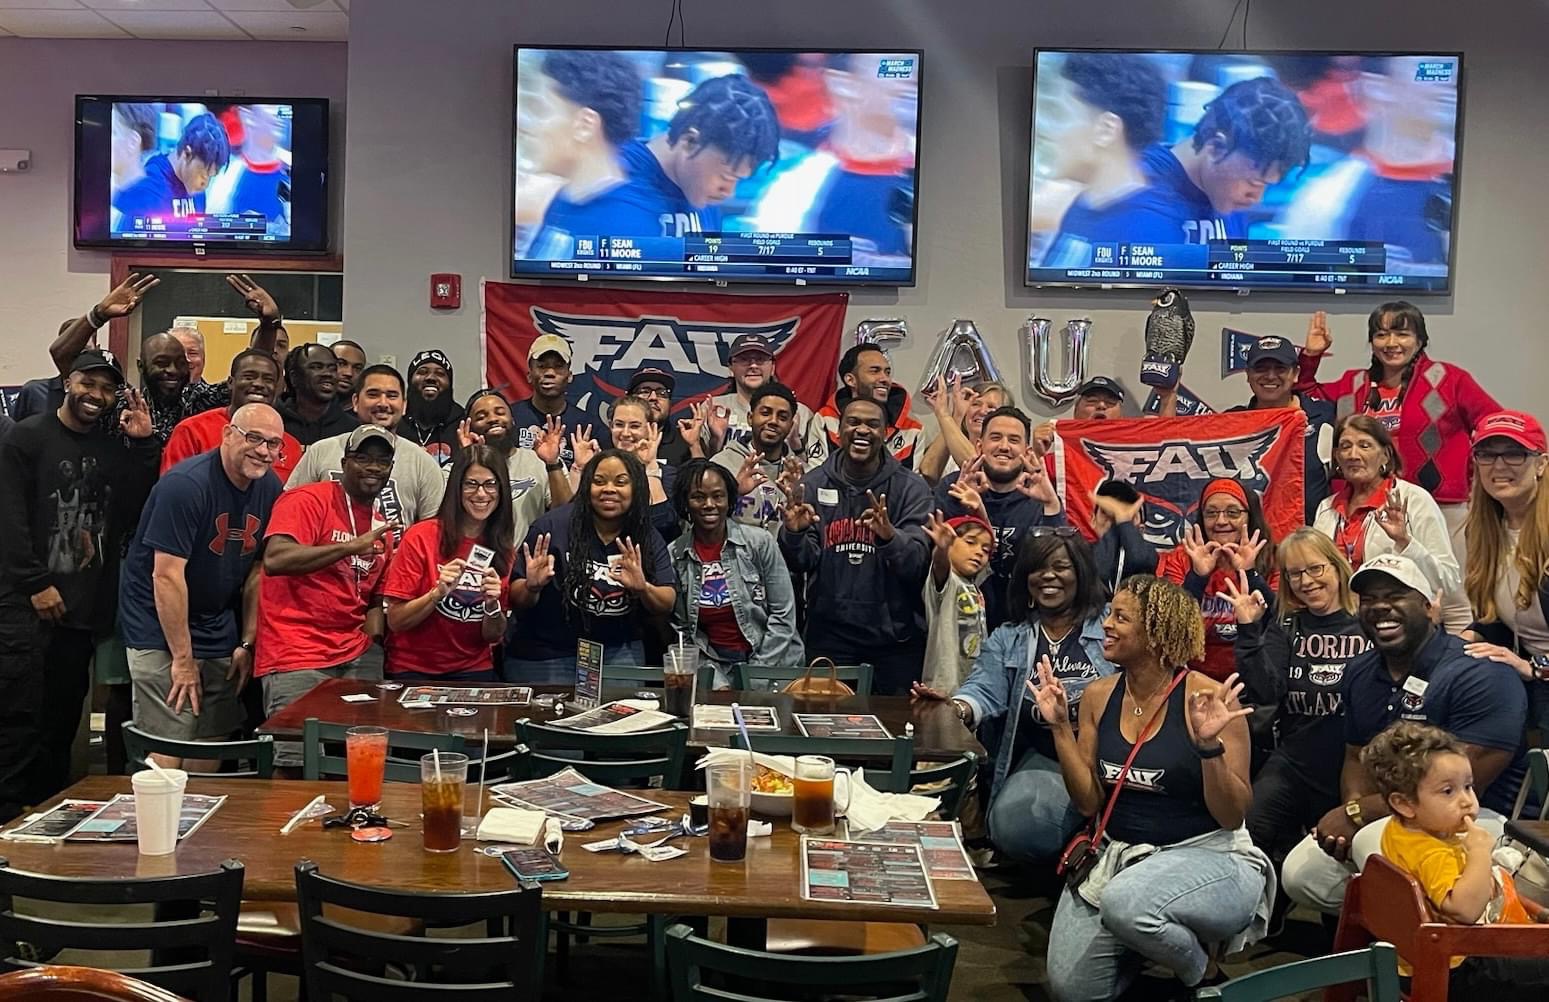 FAU Alumni Association Hosting Sweet 16 March Madness Watch Party in Coral Springs